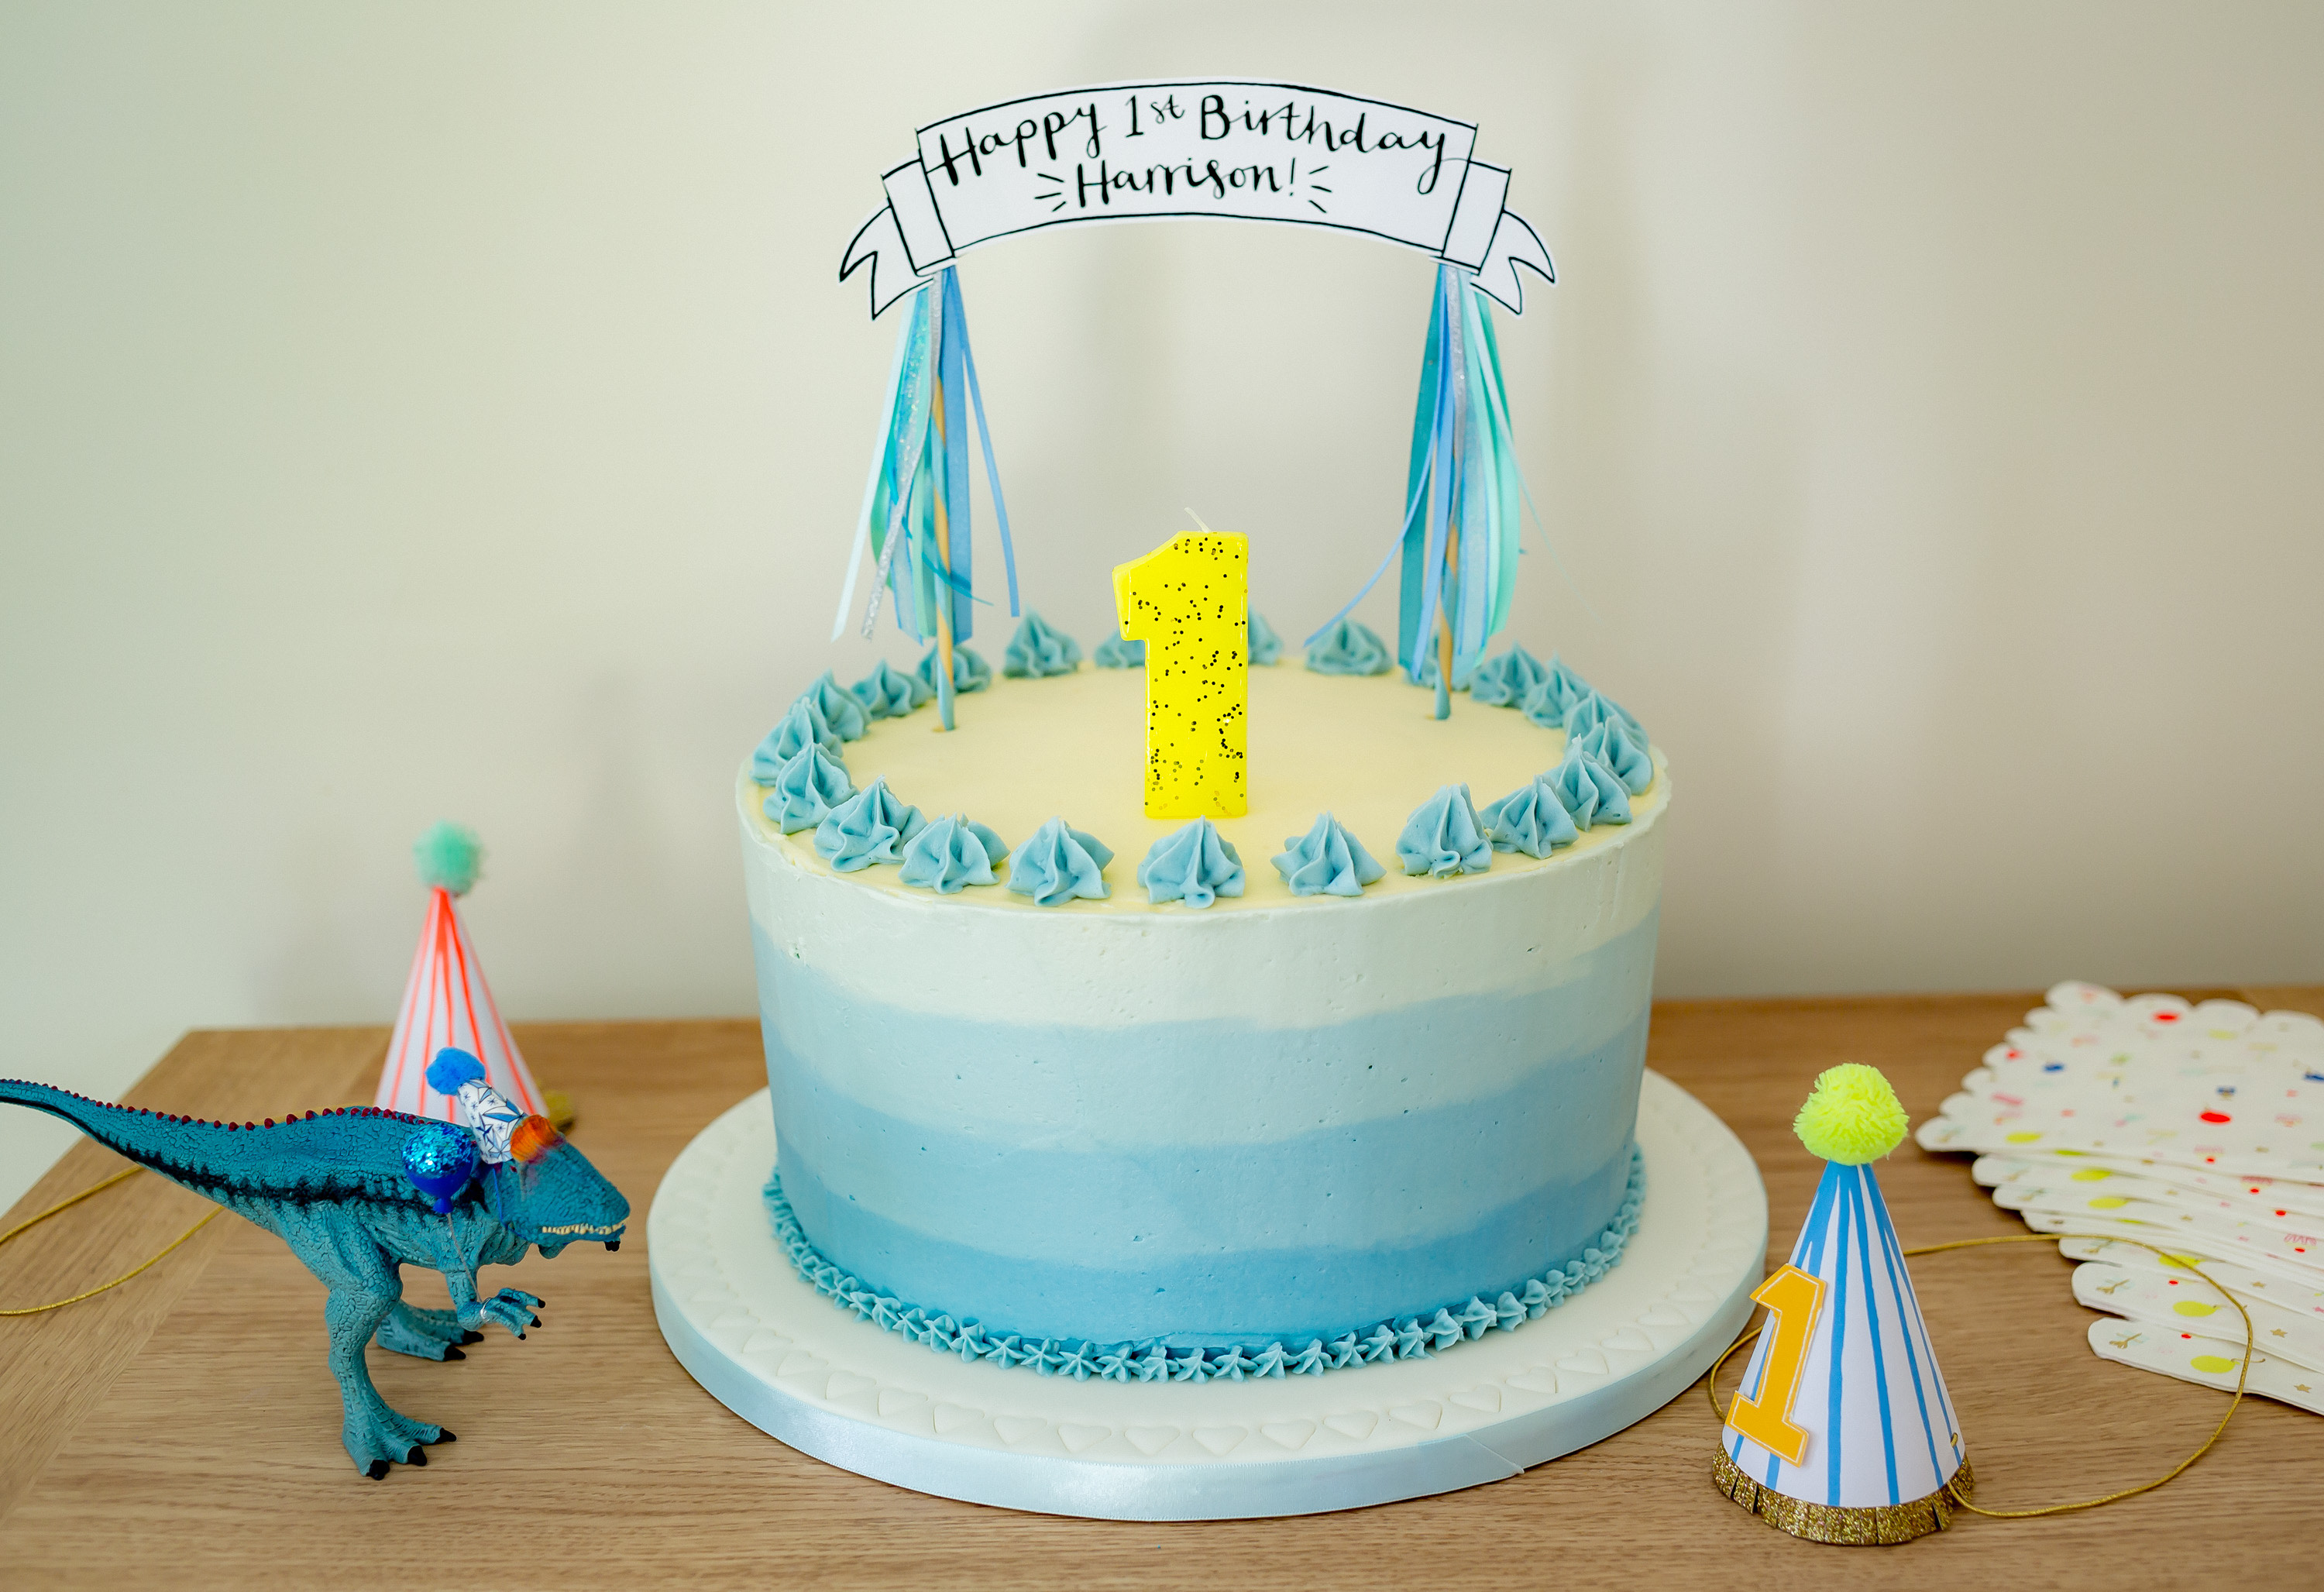 Blue-ombre Victoria sponge for a dinosaur themed 1st birthday